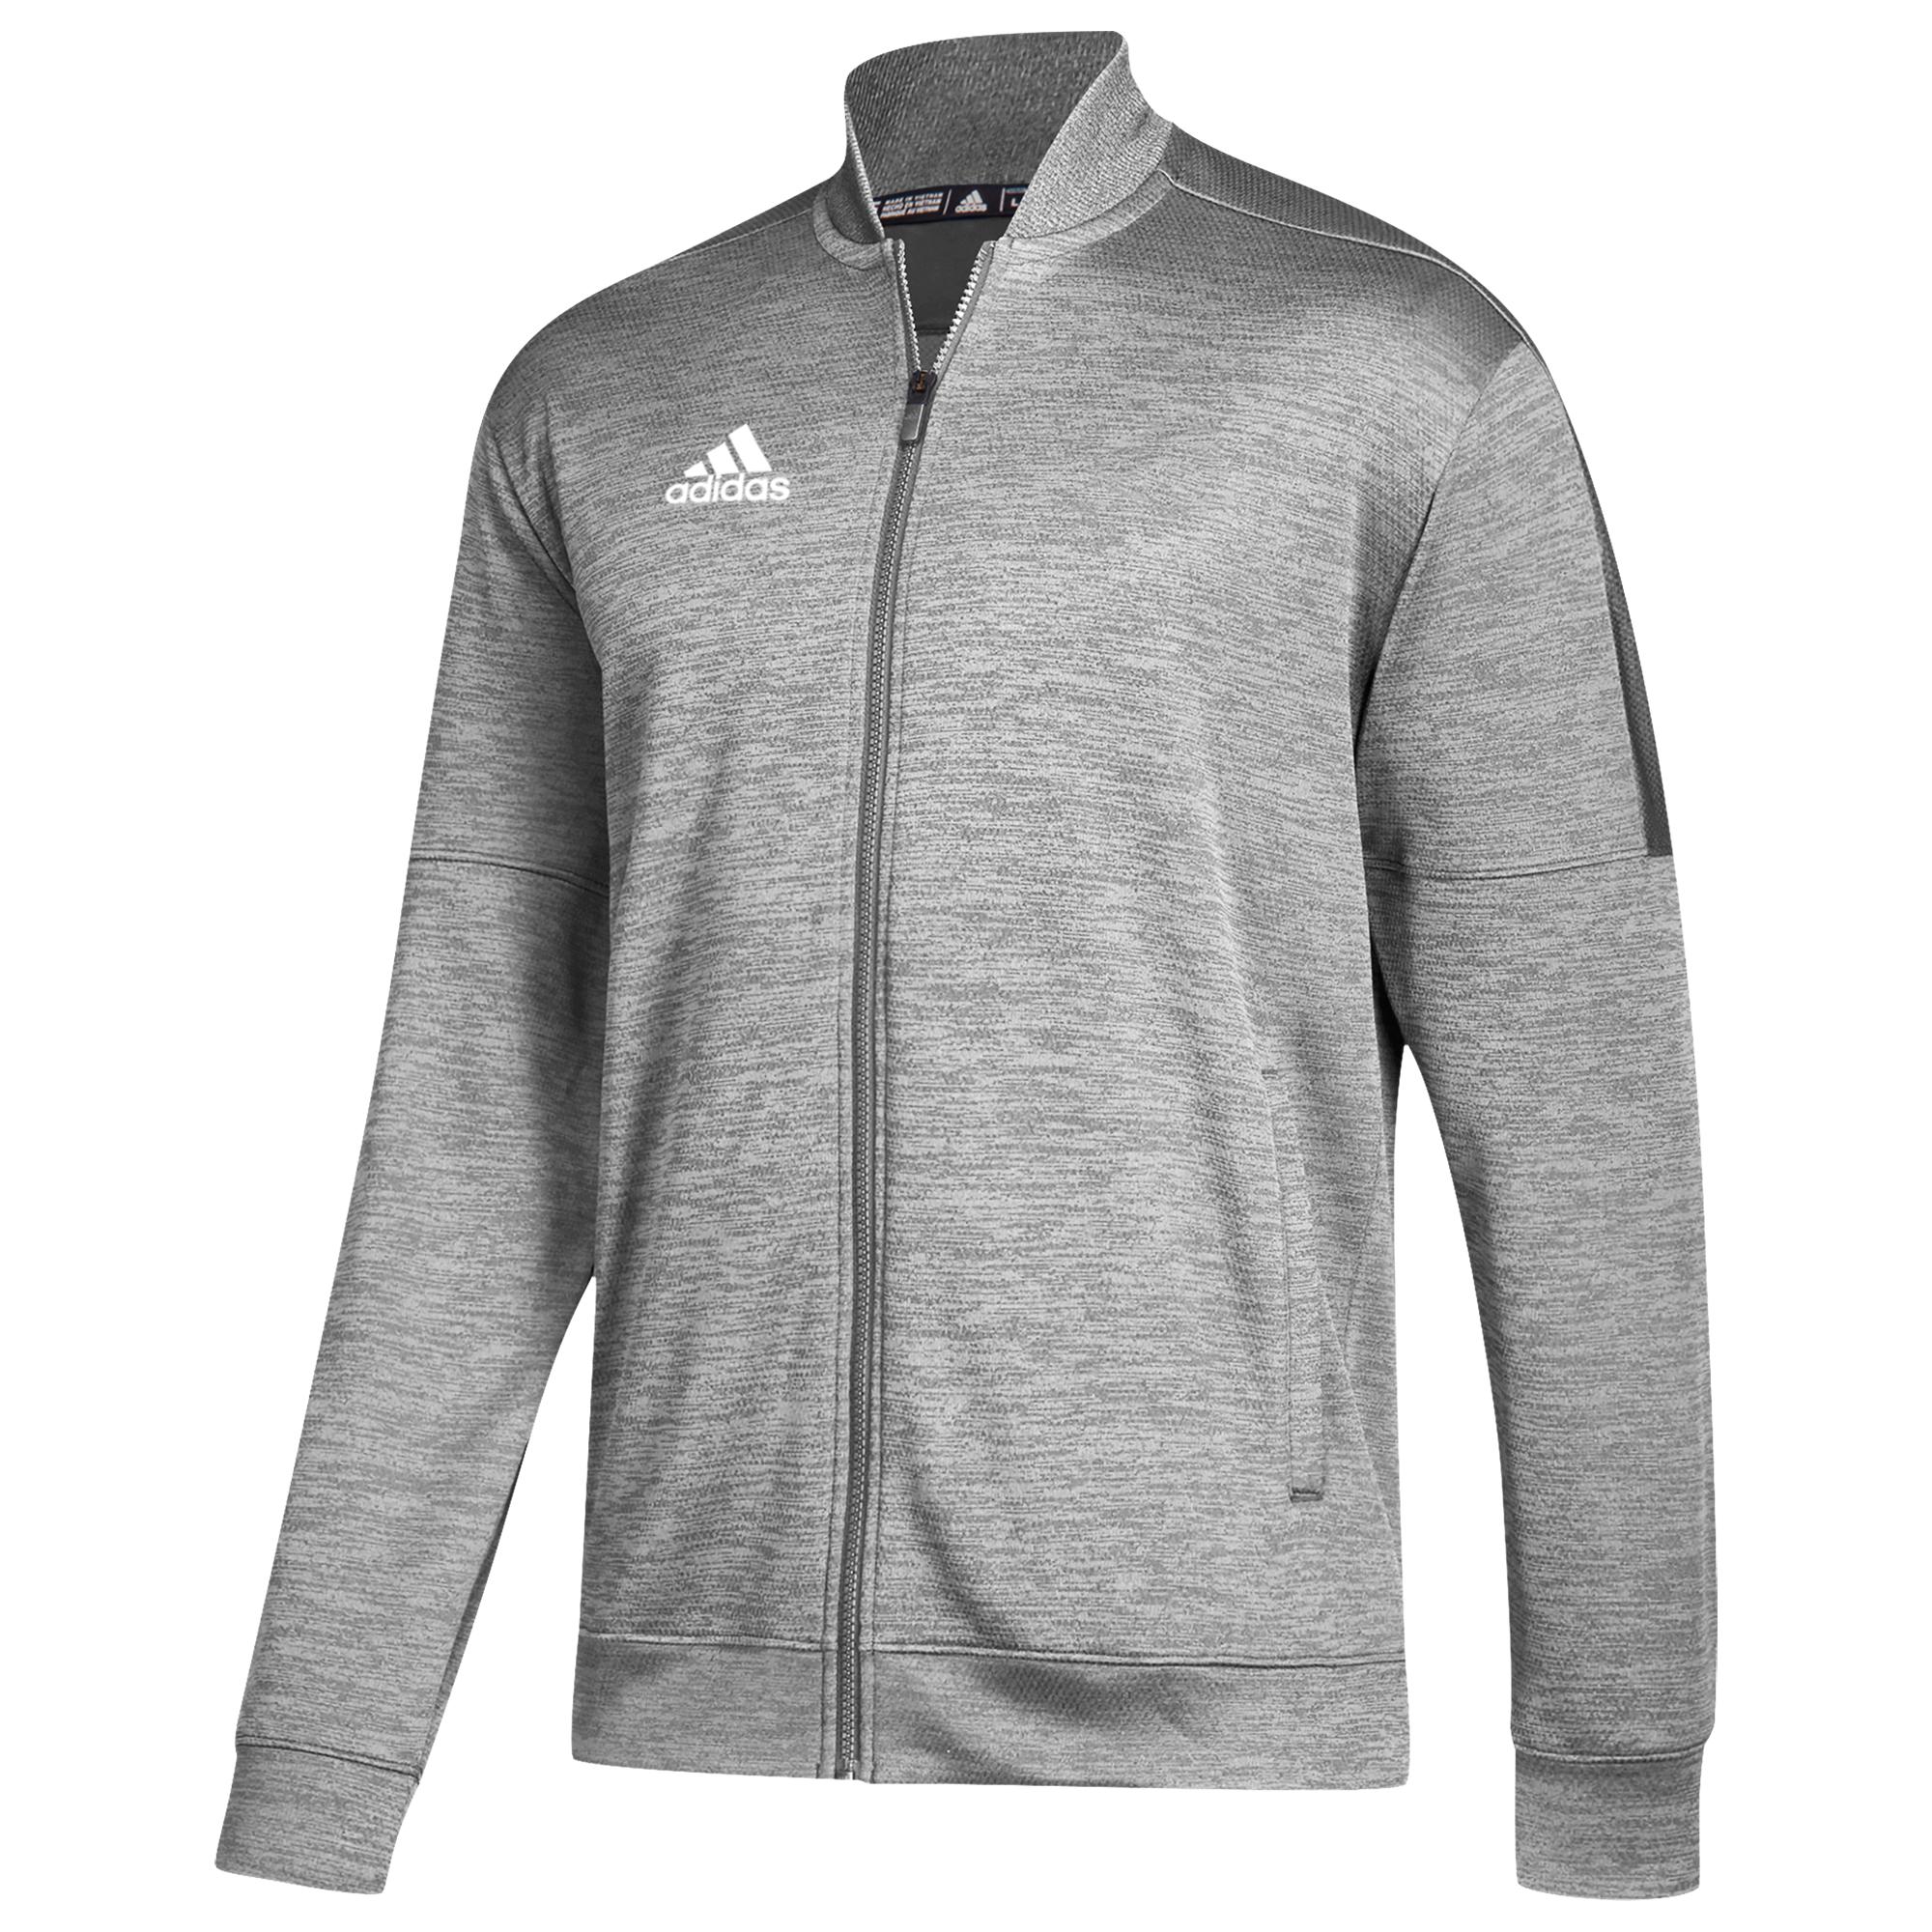 adidas Fleece Team Issue Bomber Jacket in Grey Two (Gray) for Men - Lyst